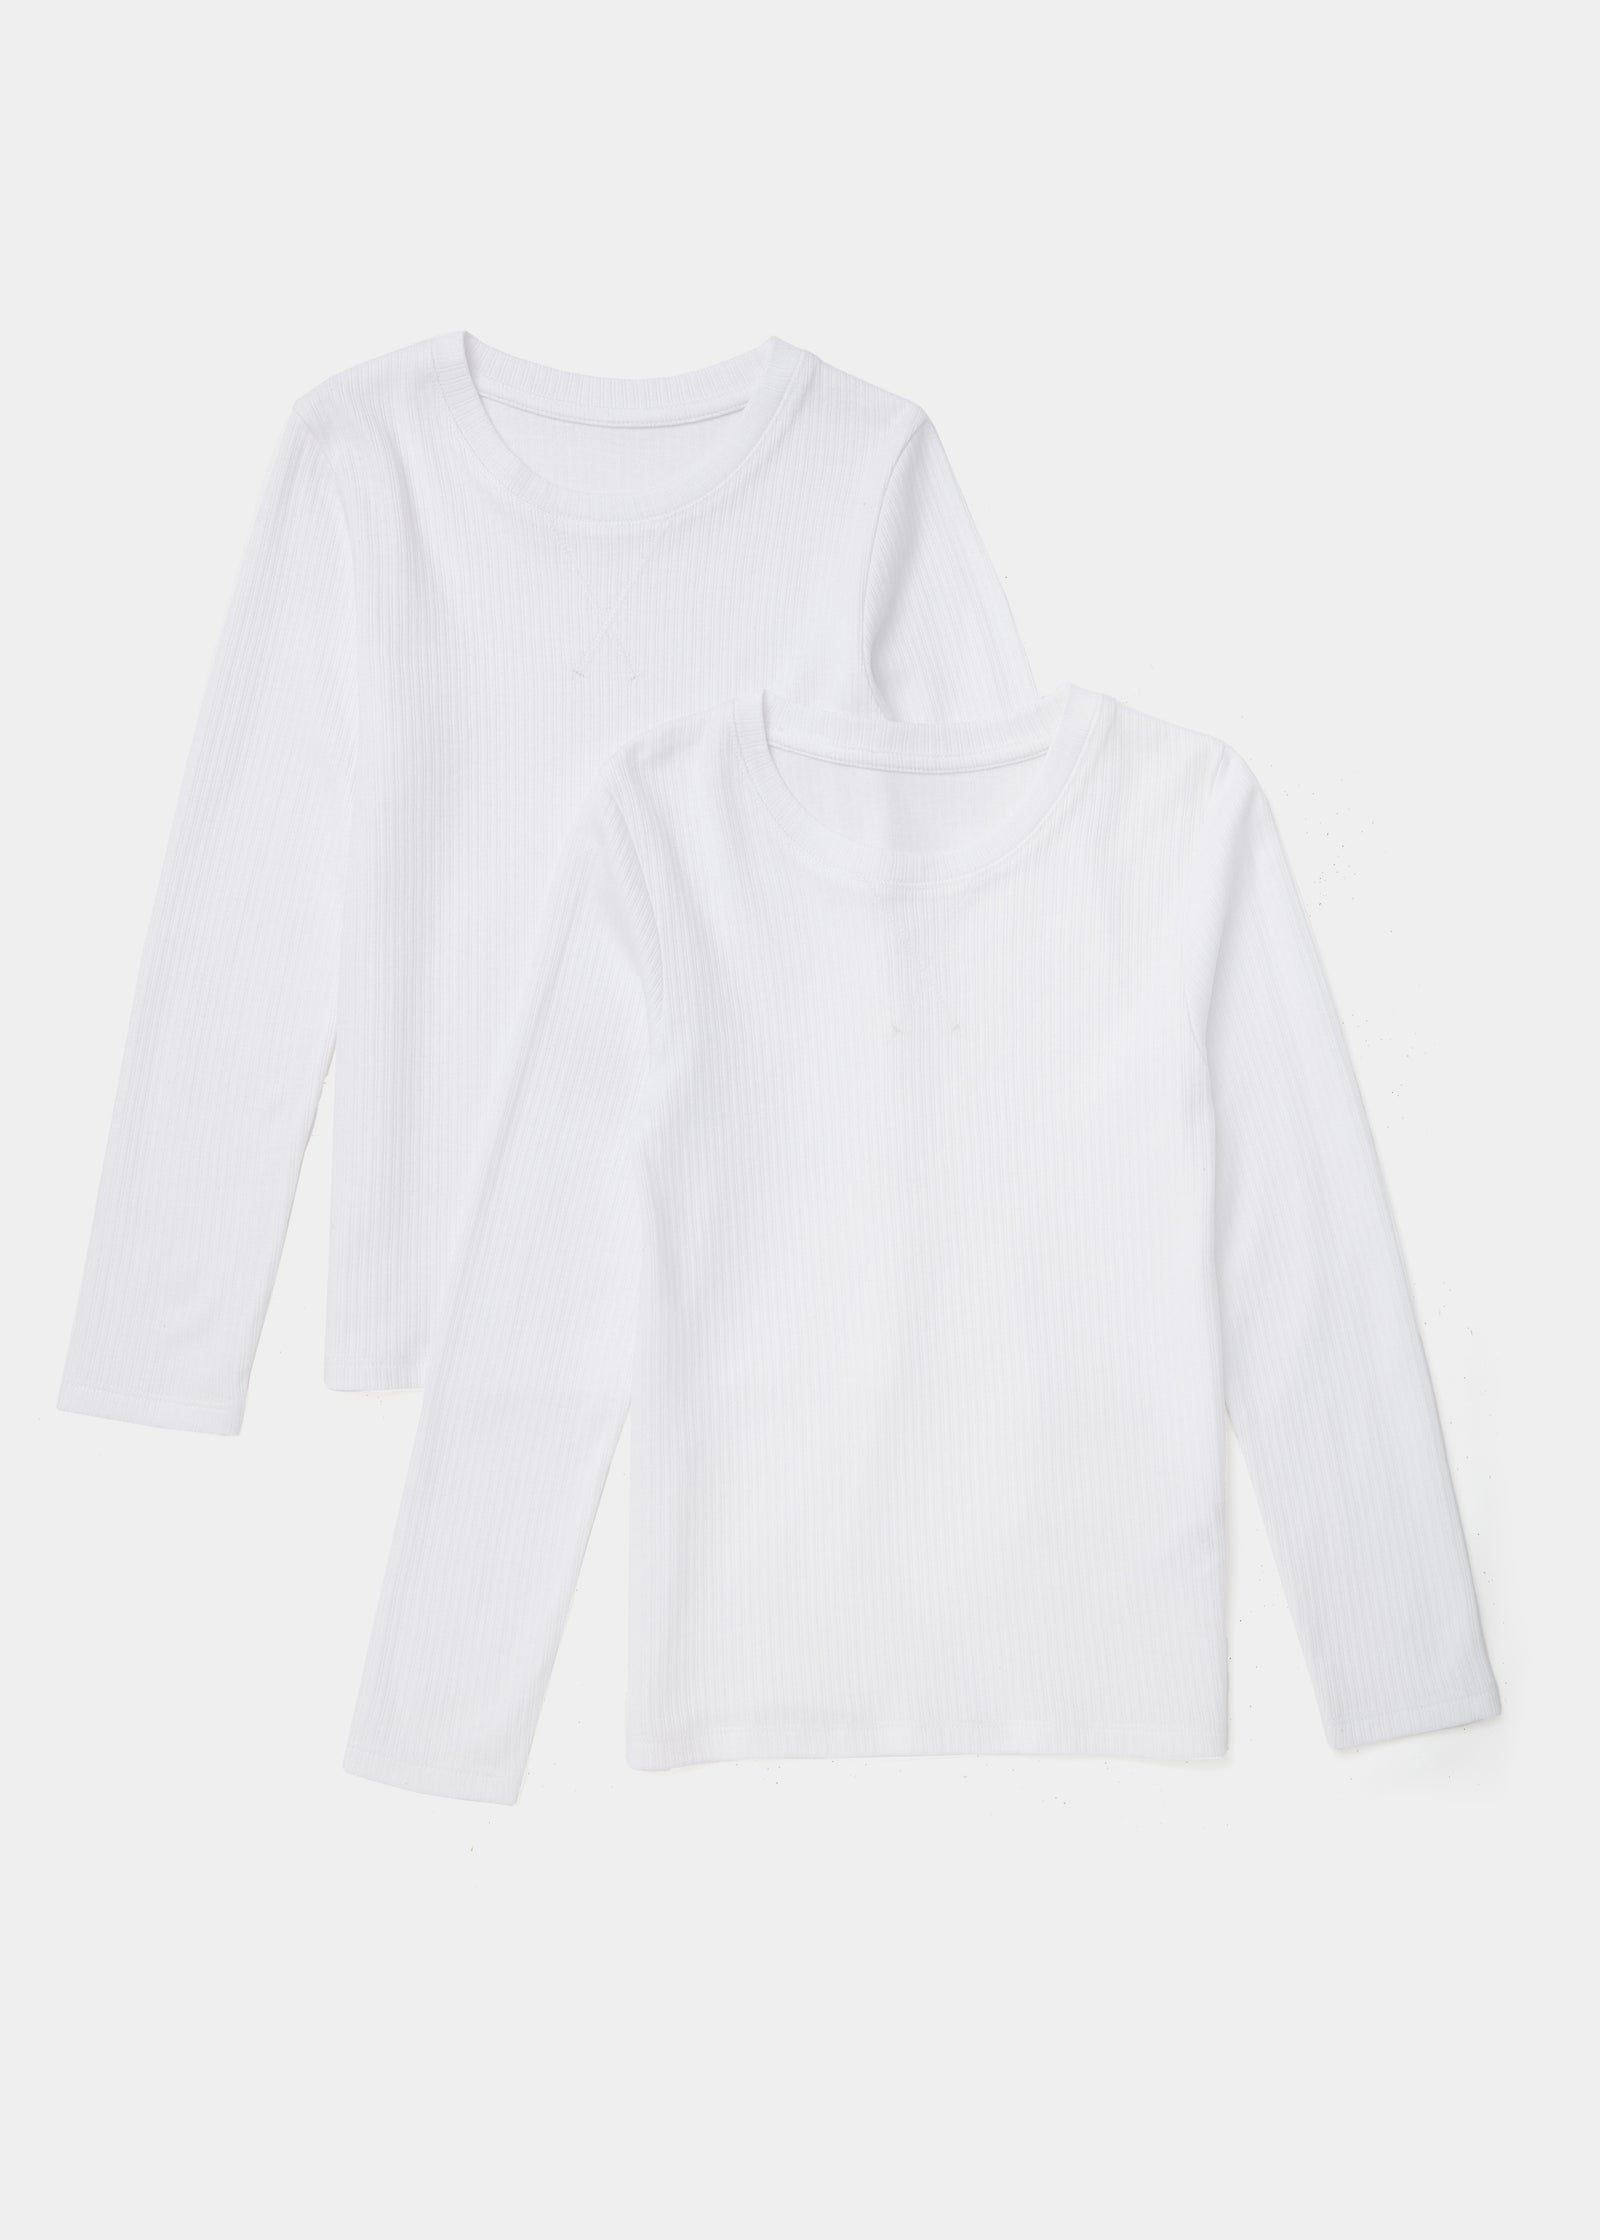 Buy Kids 2 Pack White Long Sleeve Thermal T-Shirts (2-13yrs) - White - 8-9Y  in Oman - bfab